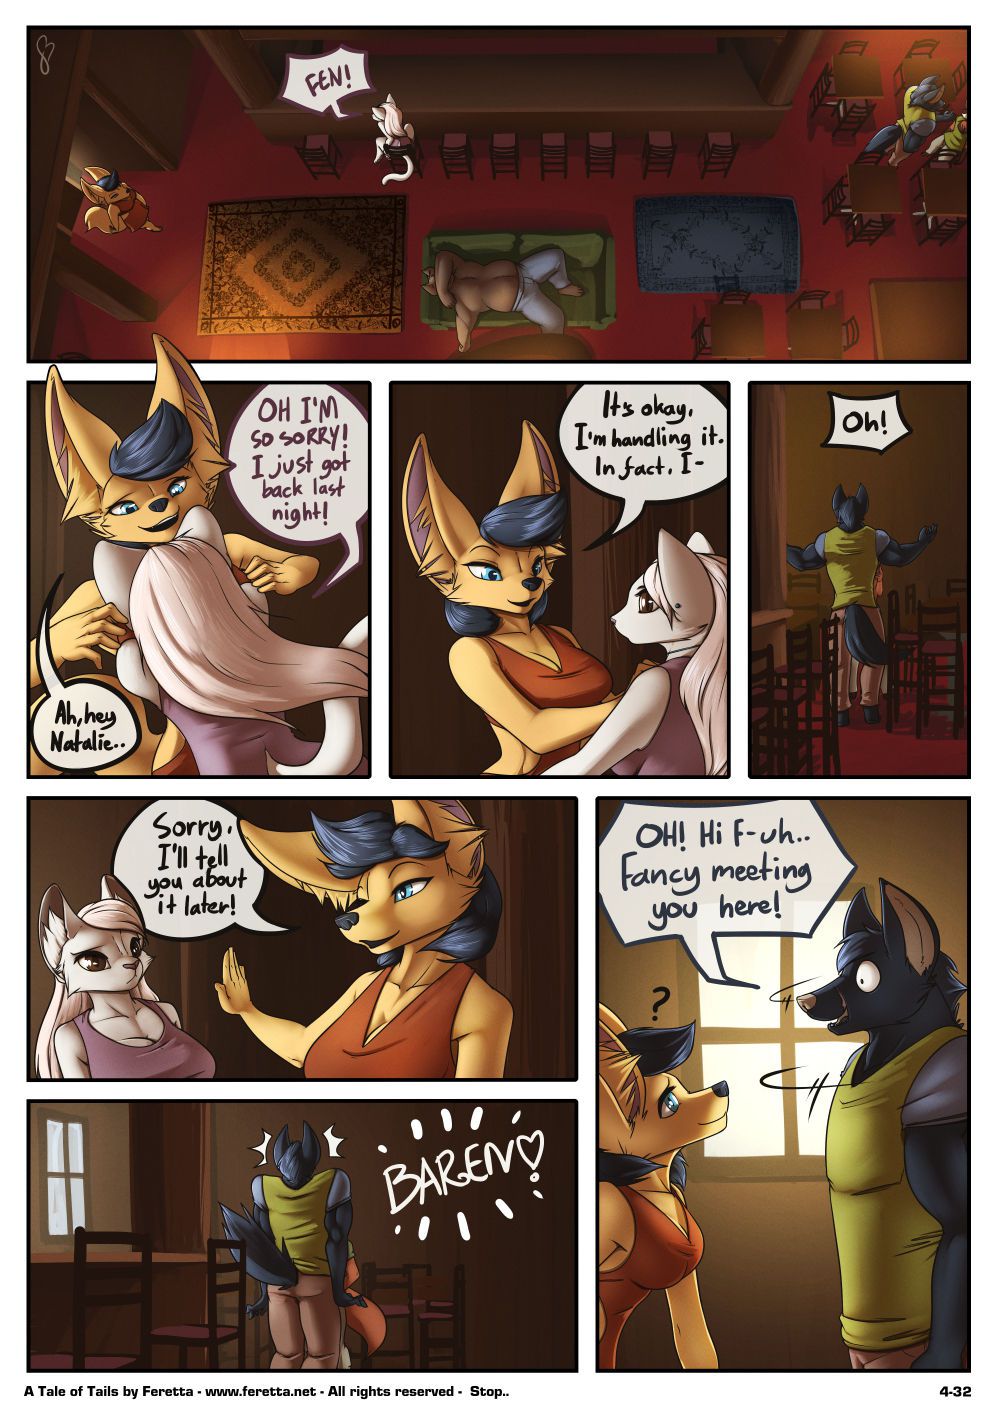 [Feretta] Farellian Legends: A Tale of Tails (w/Extras) [Ongoing] 182